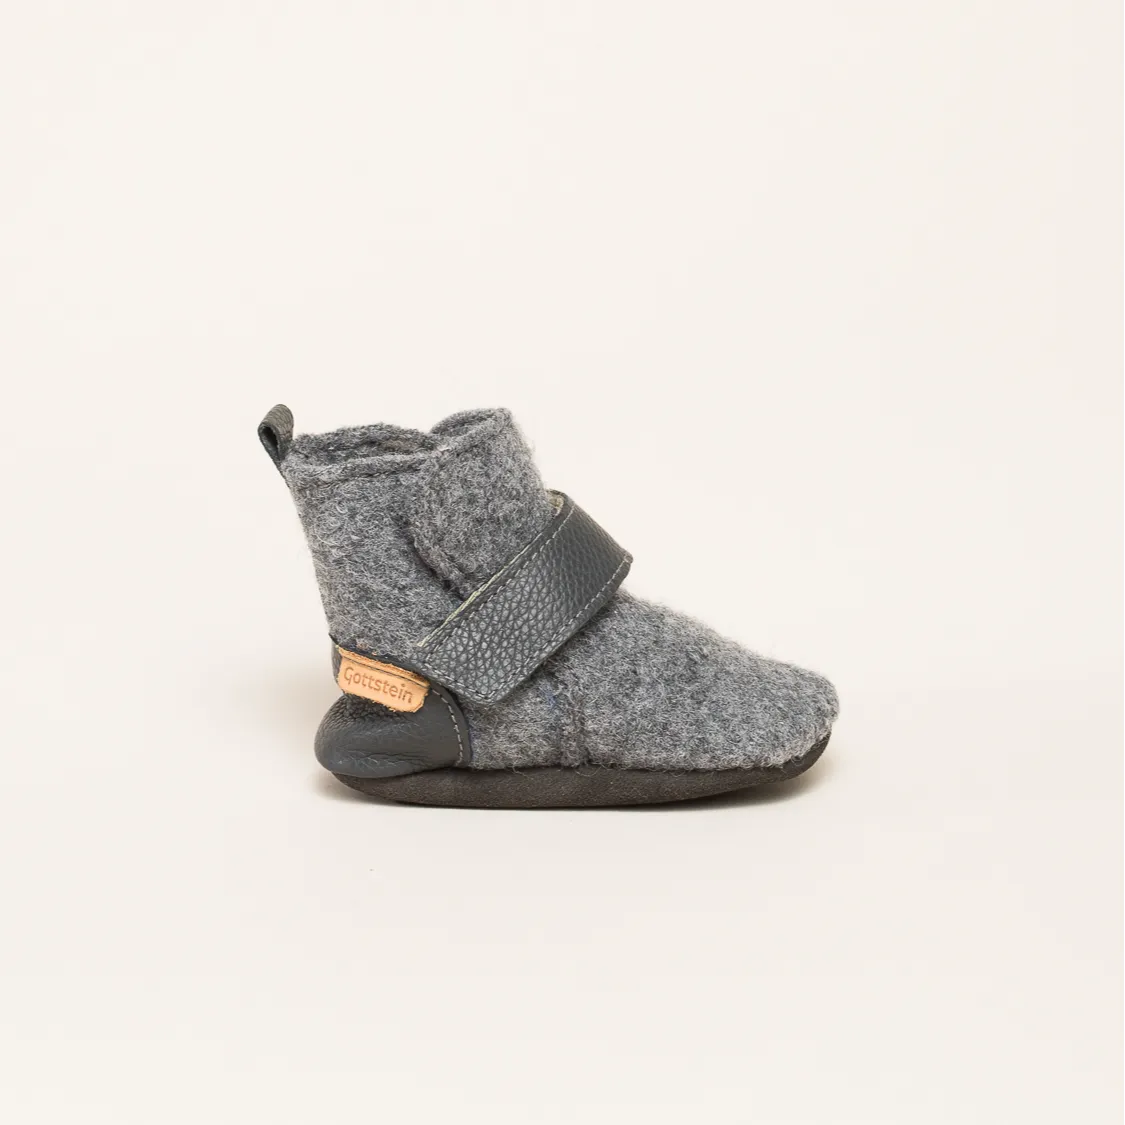 Baby shoe bootee